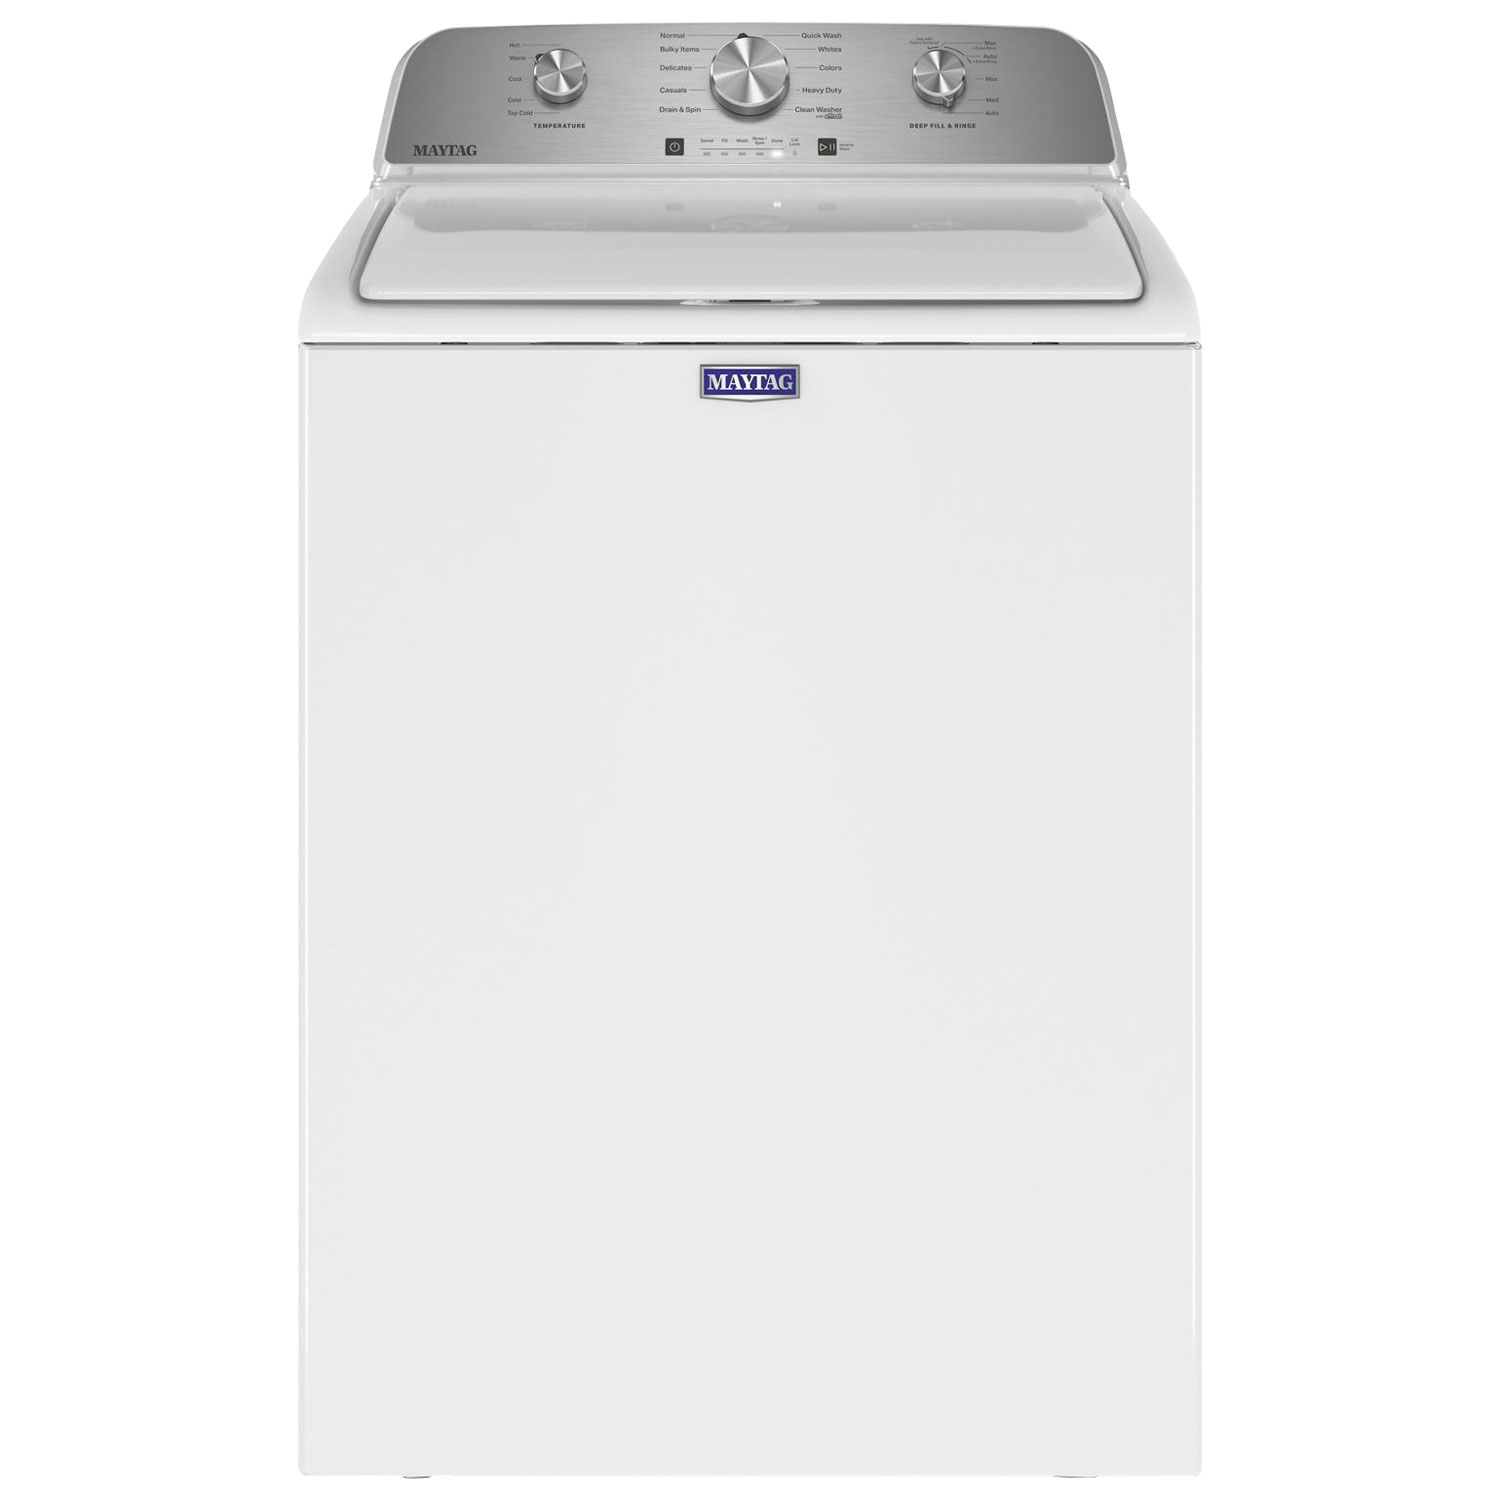 Maytag 5.2 Cu. Ft. High Efficiency Top Load Washer (MVW4505MW) - White